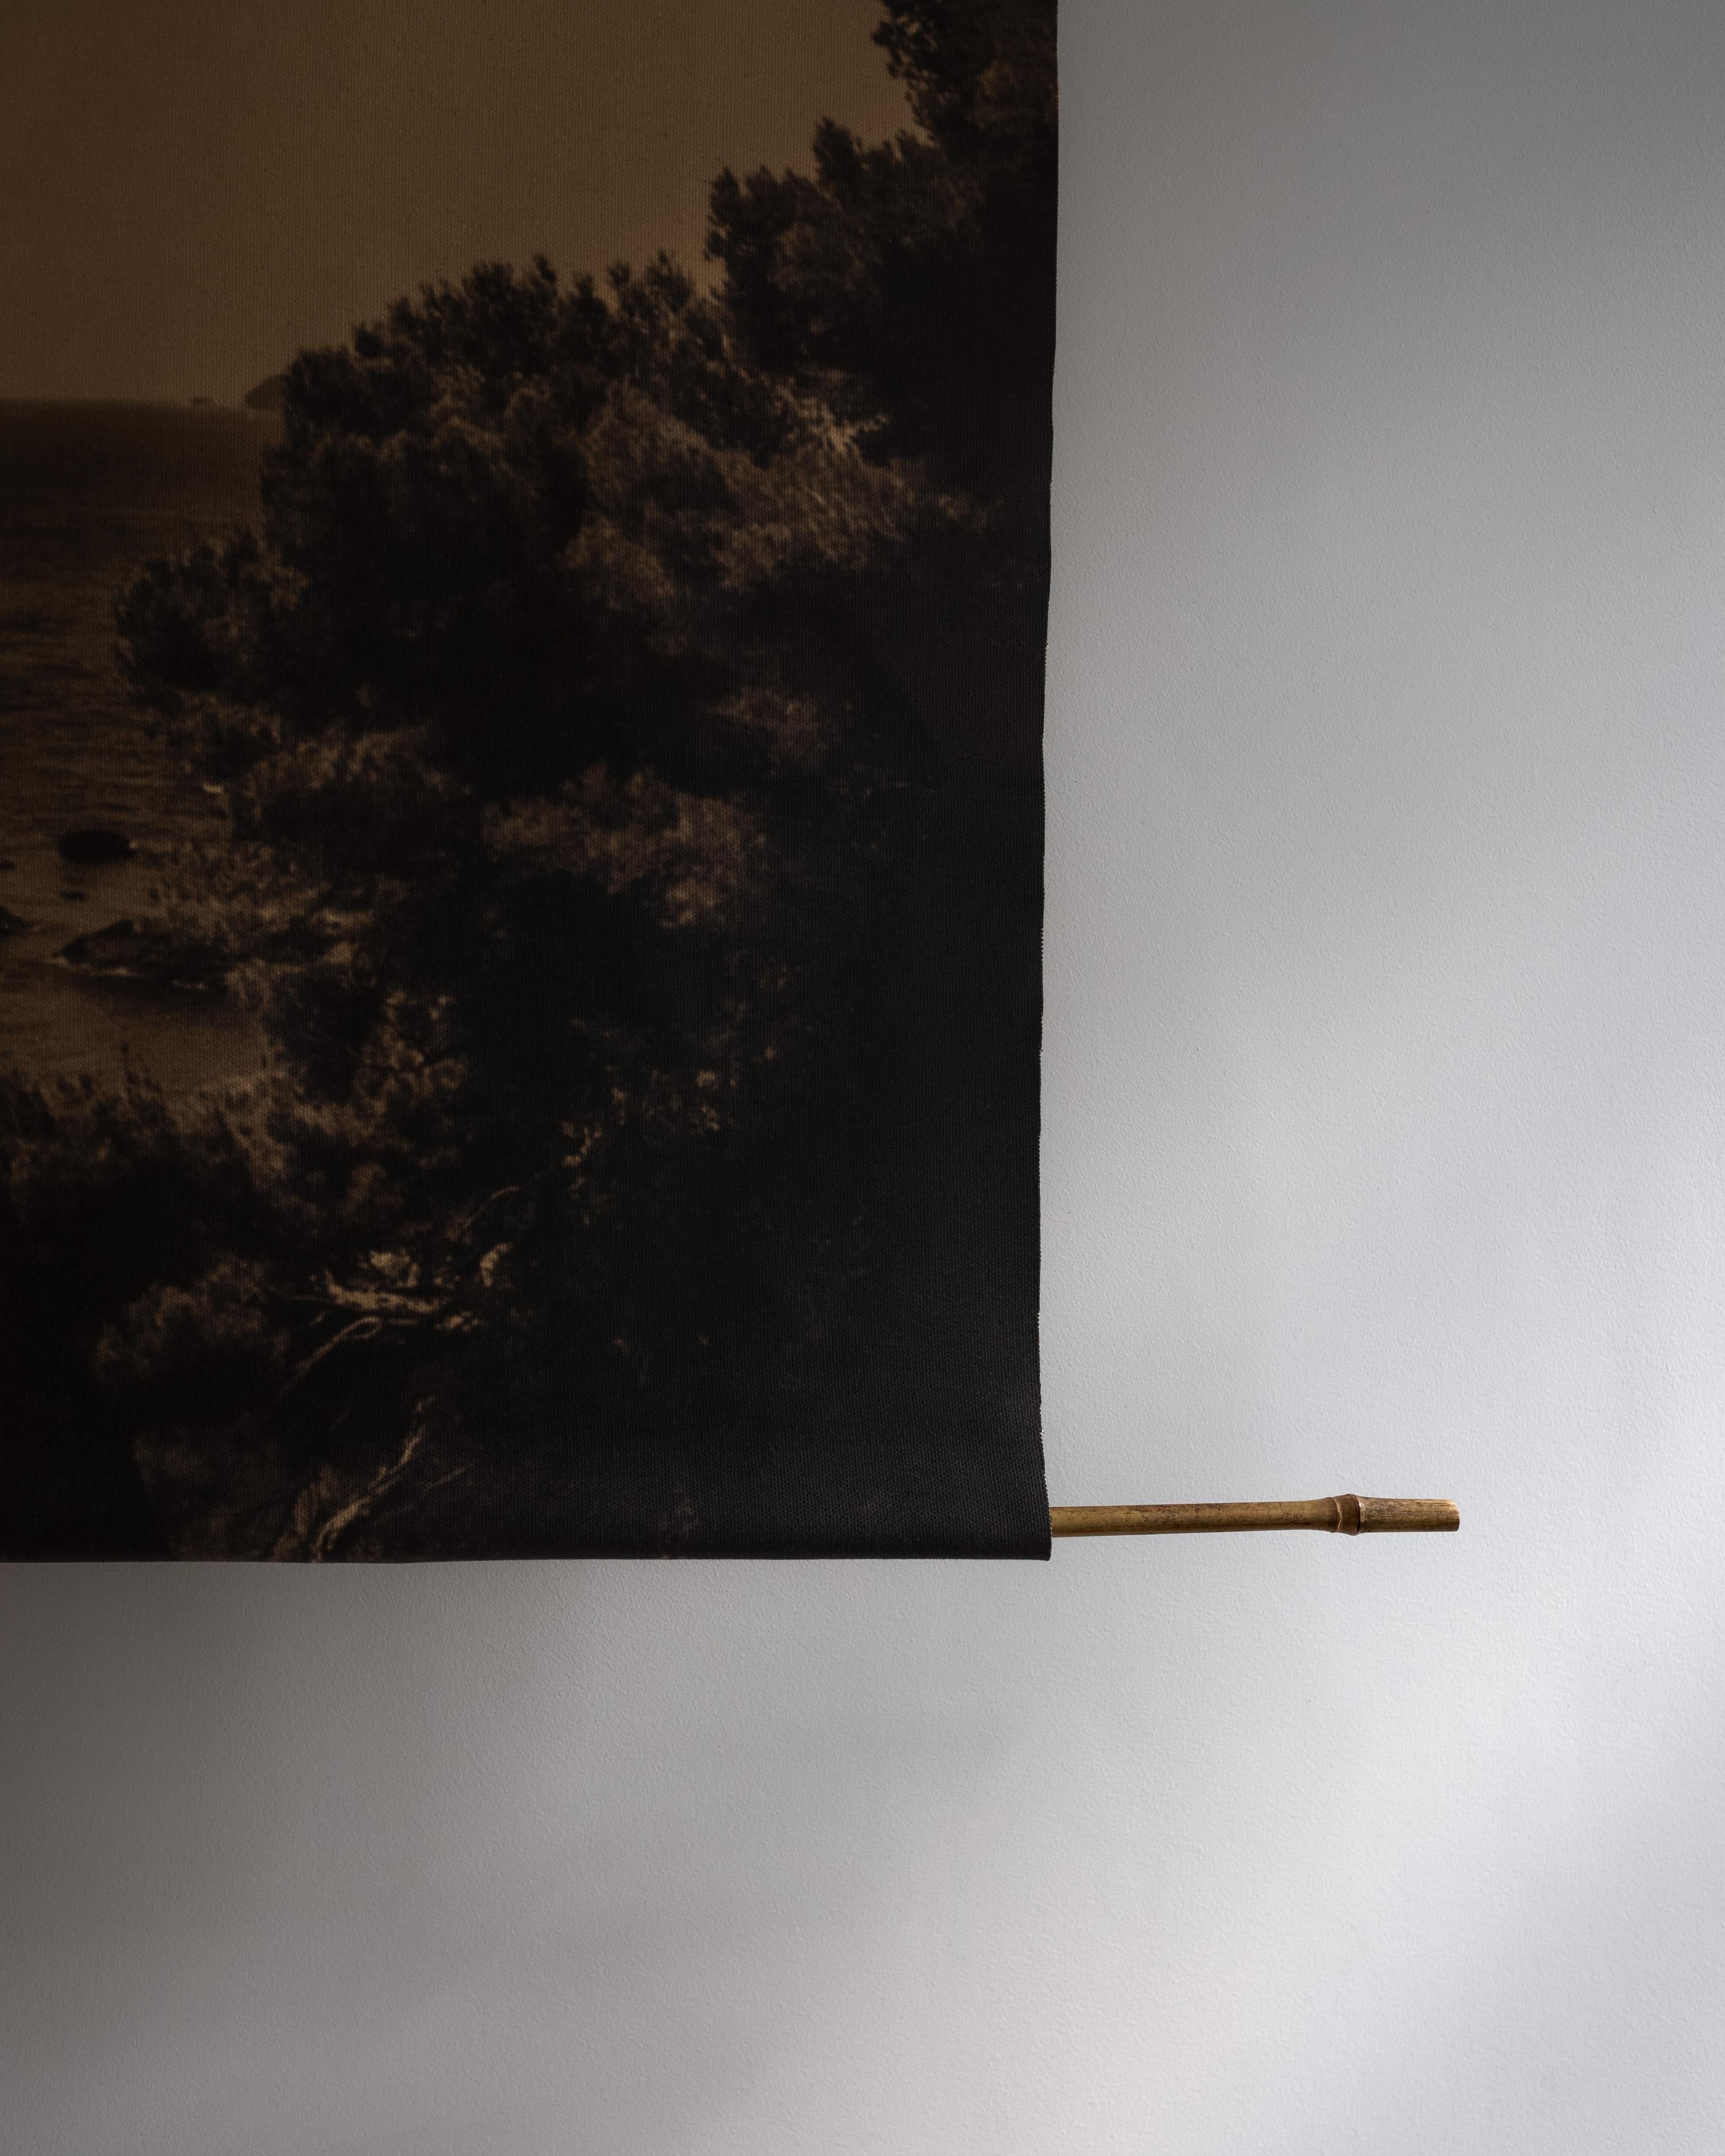 Prevail-organic cotton canvas scroll on bamboo 120x96cm limited edition 2 of 5.  - Photograph by Ugne Pouwell